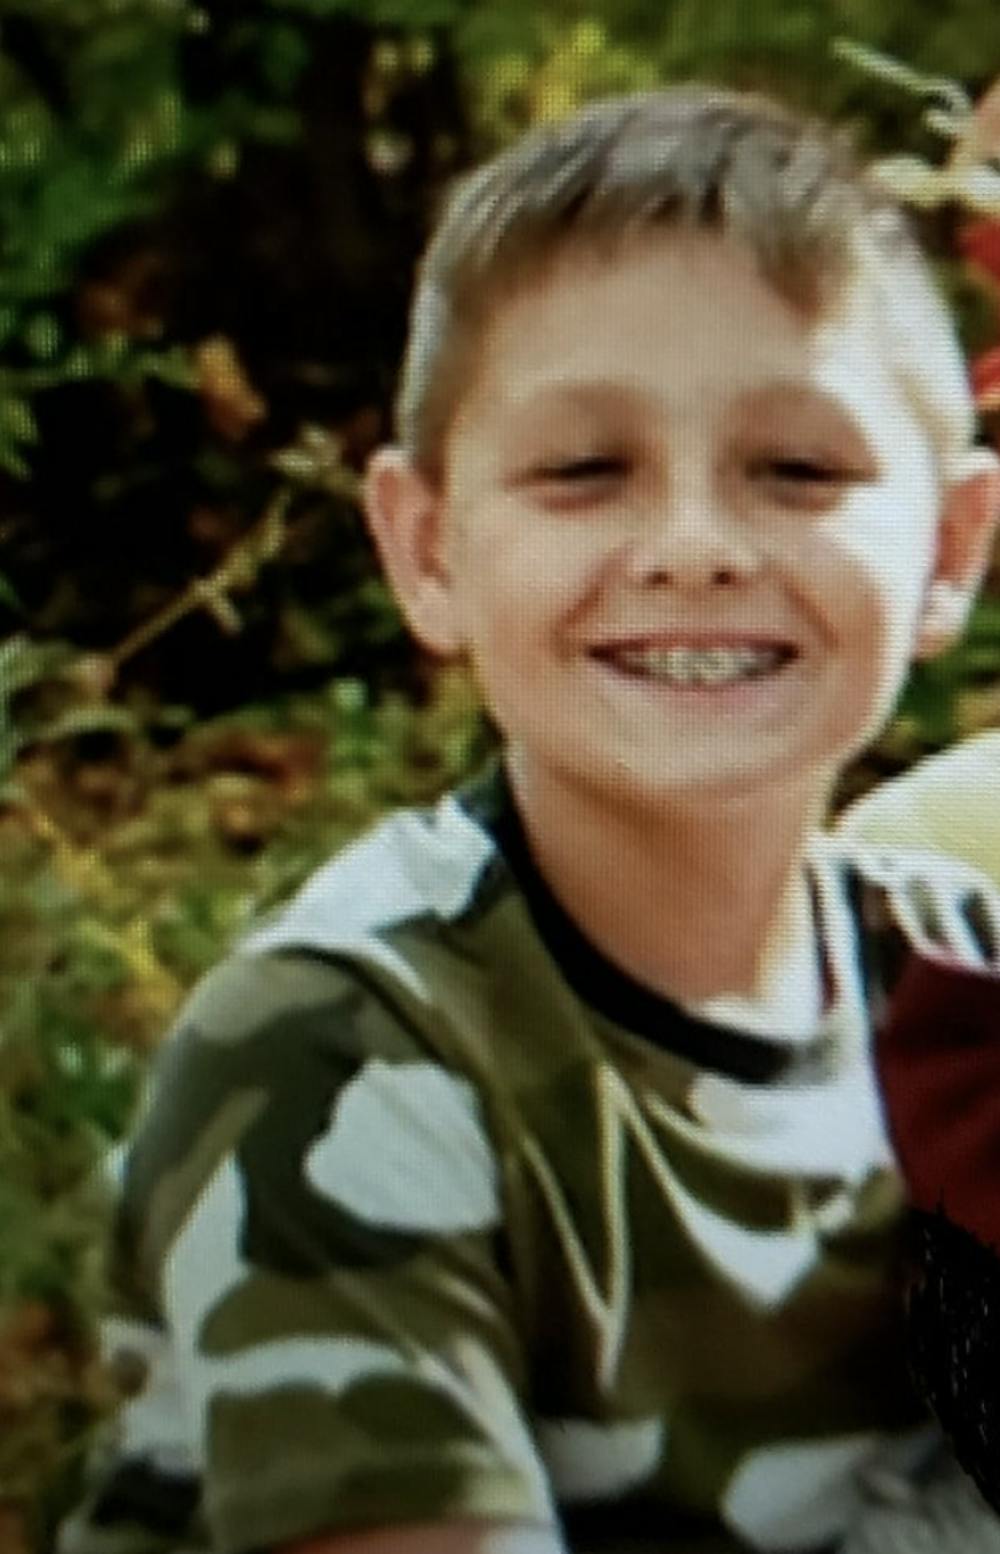 <p>East Lansing police began searching for 11-year-old Peyton Farner, pictured, early Sunday. Photo courtesy of East Lansing Police Department.</p>